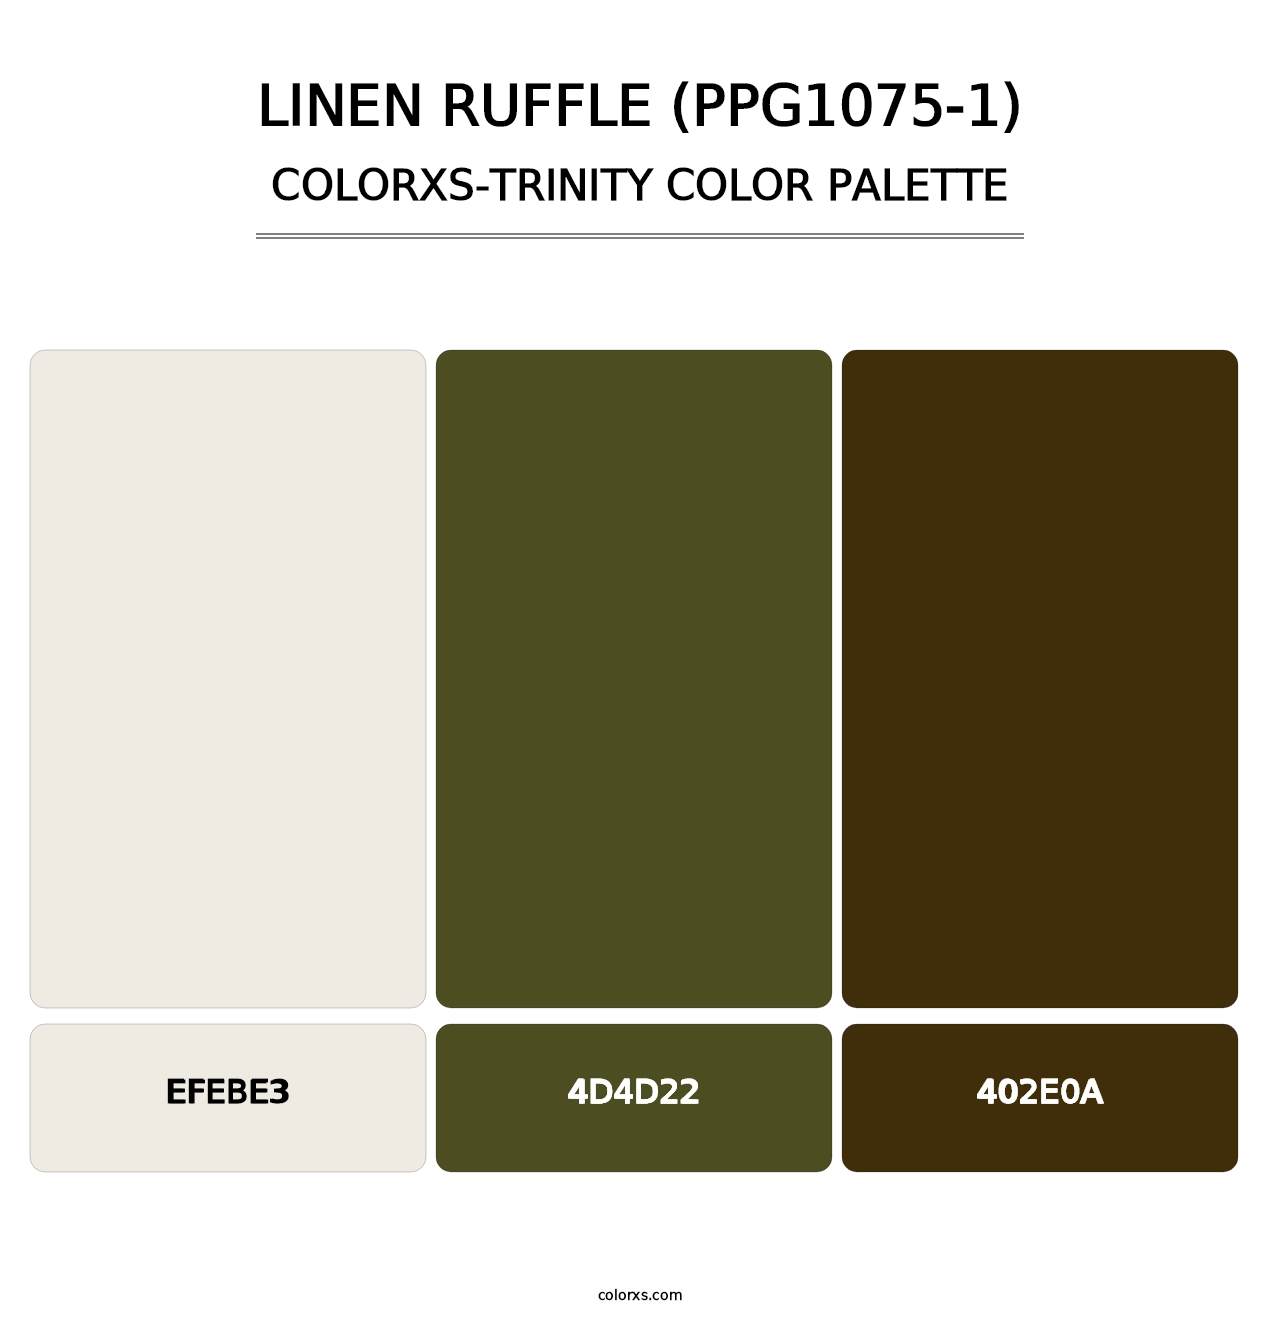 Linen Ruffle (PPG1075-1) - Colorxs Trinity Palette